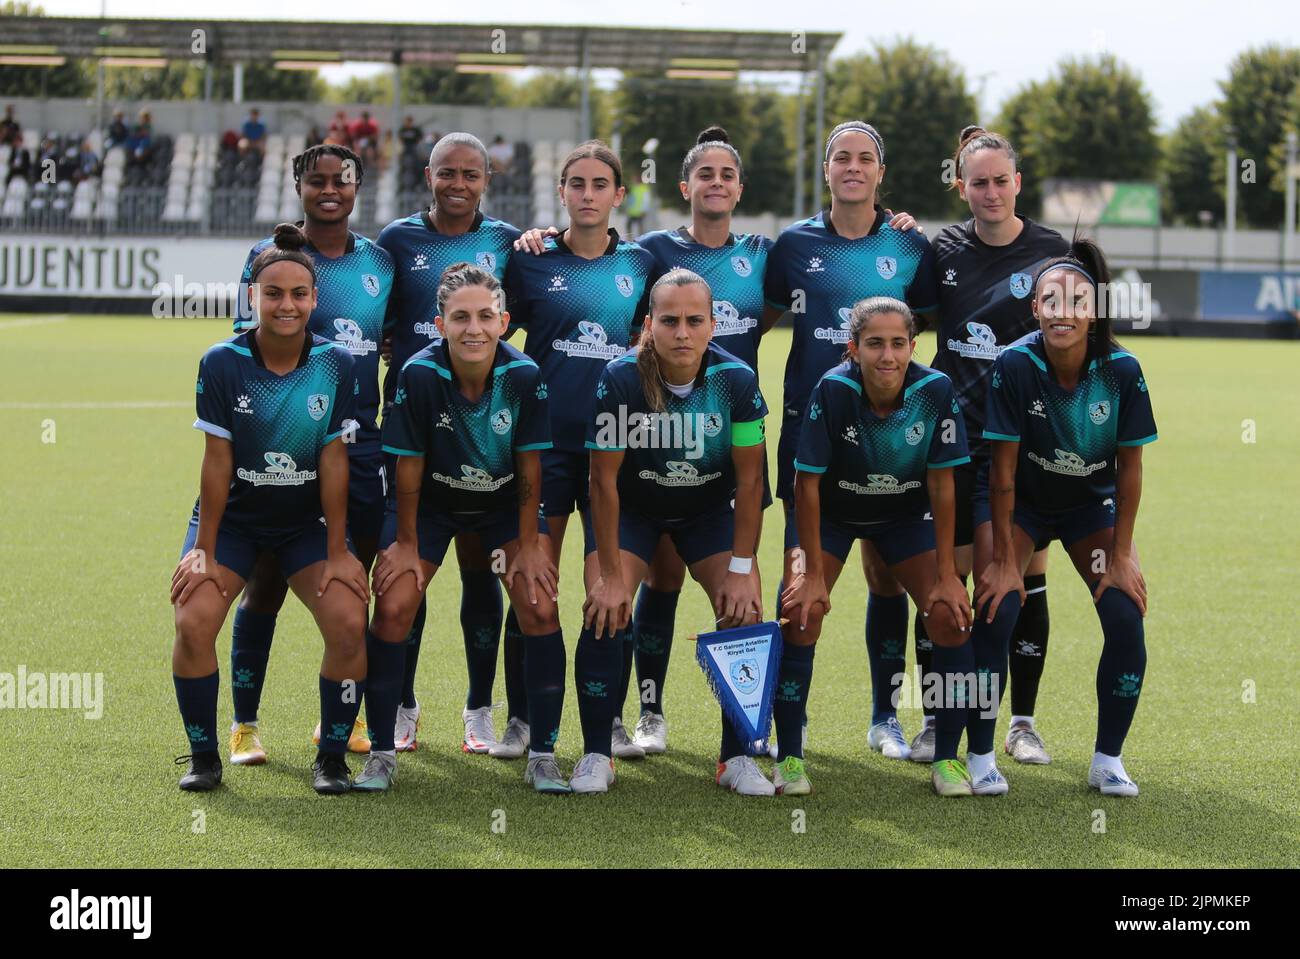 Fc qiryat during the match Tallin Fc Flora and Fc qiryat of the first qualifying round of the Uefa Women’s Champions League on August 18, 2022 at Juventus Training Ground, Turin, Italy. Photo Nderim Kaceli Stock Photo